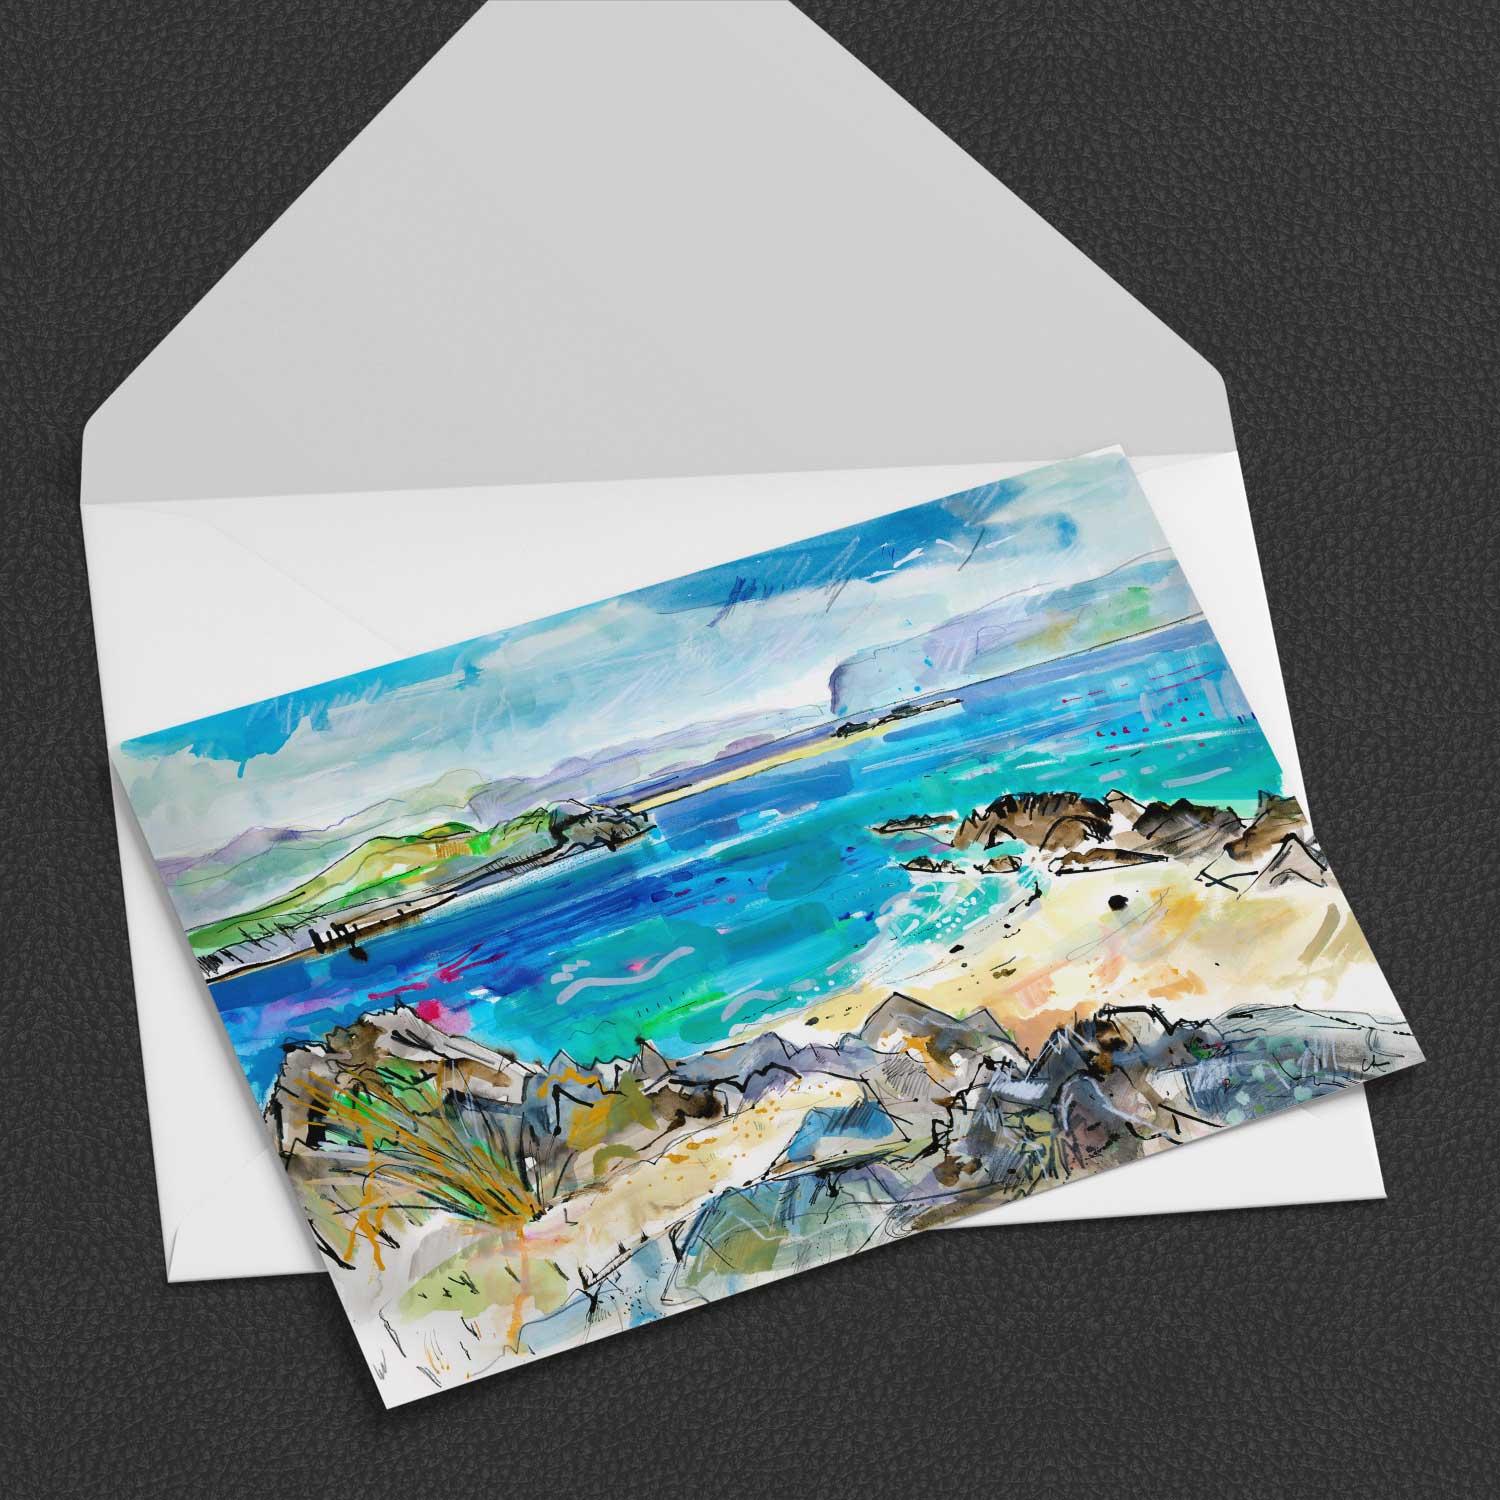 Green Sea, Iona Greeting Card from an original painting by artist Clare Arbuthnott